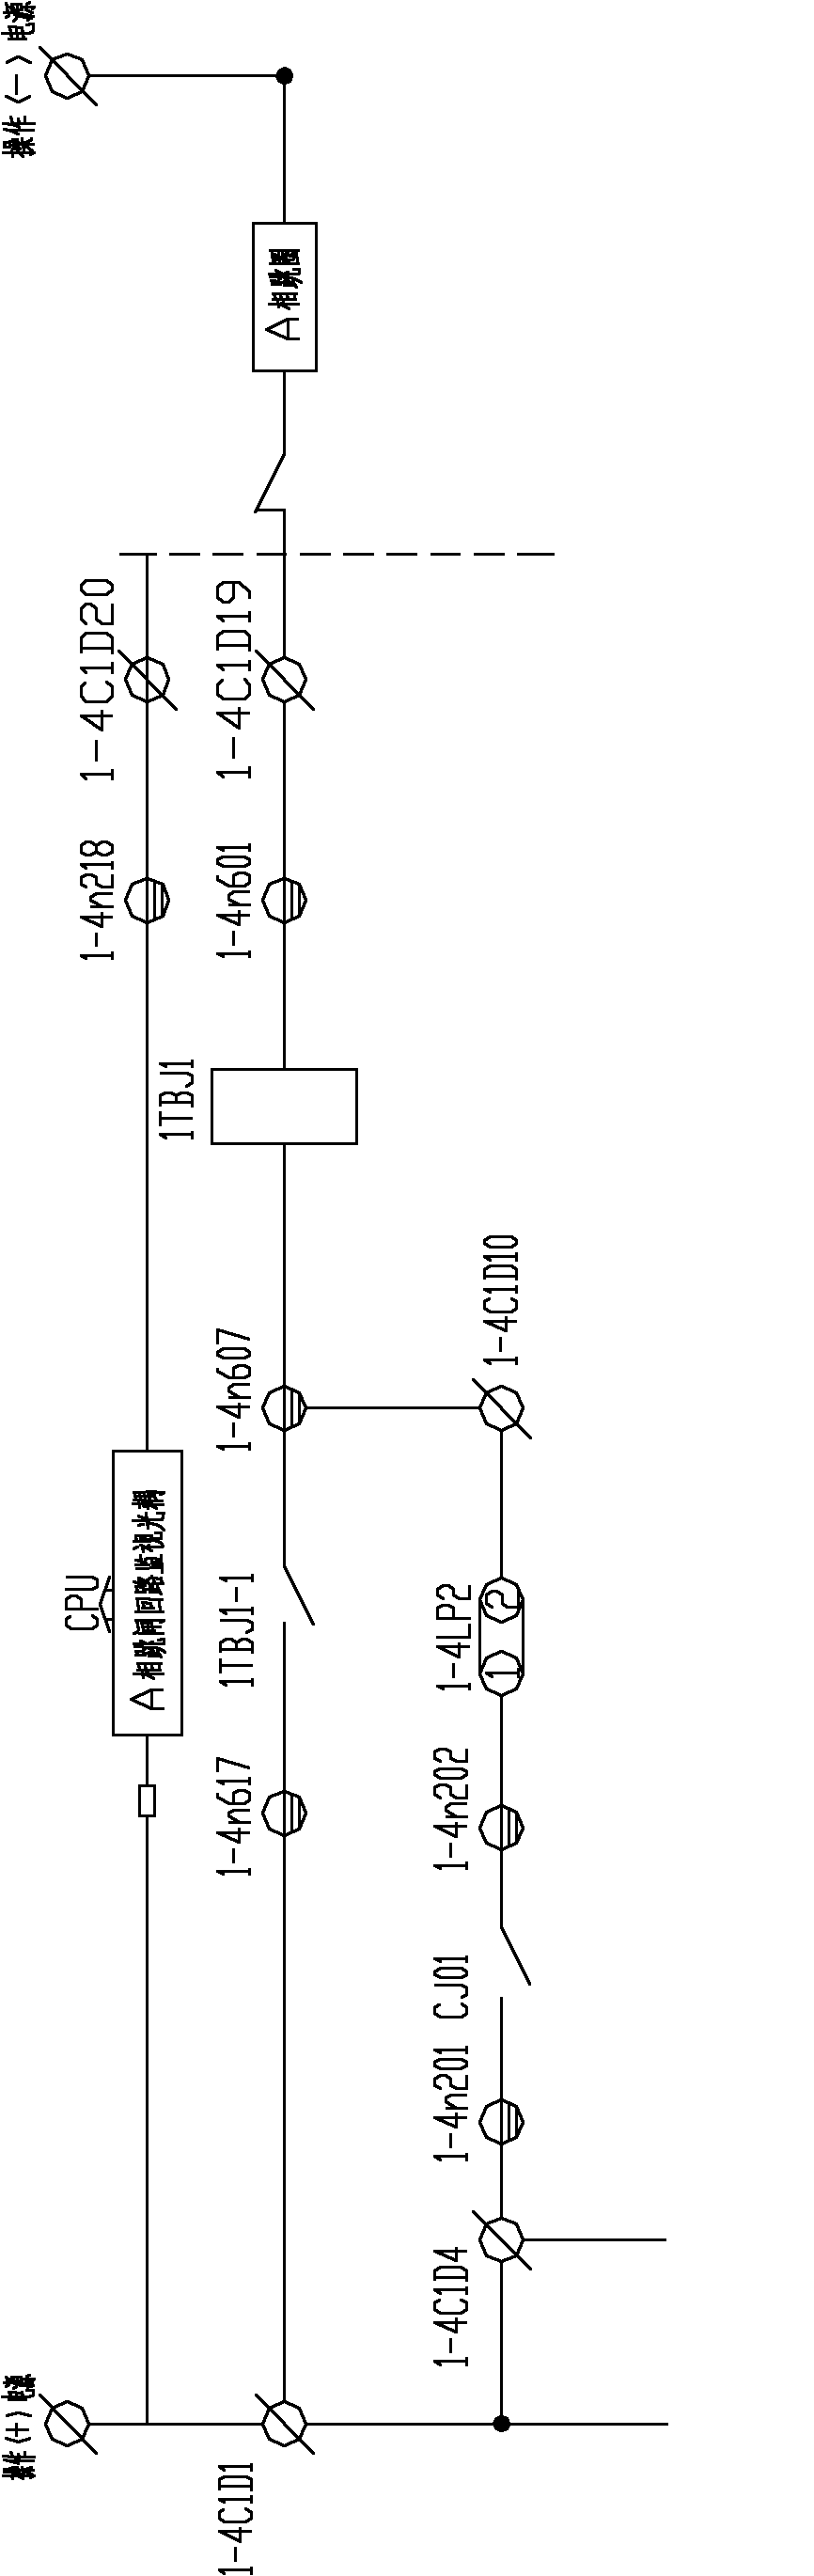 Circuit for determining lockout states of lockout relays